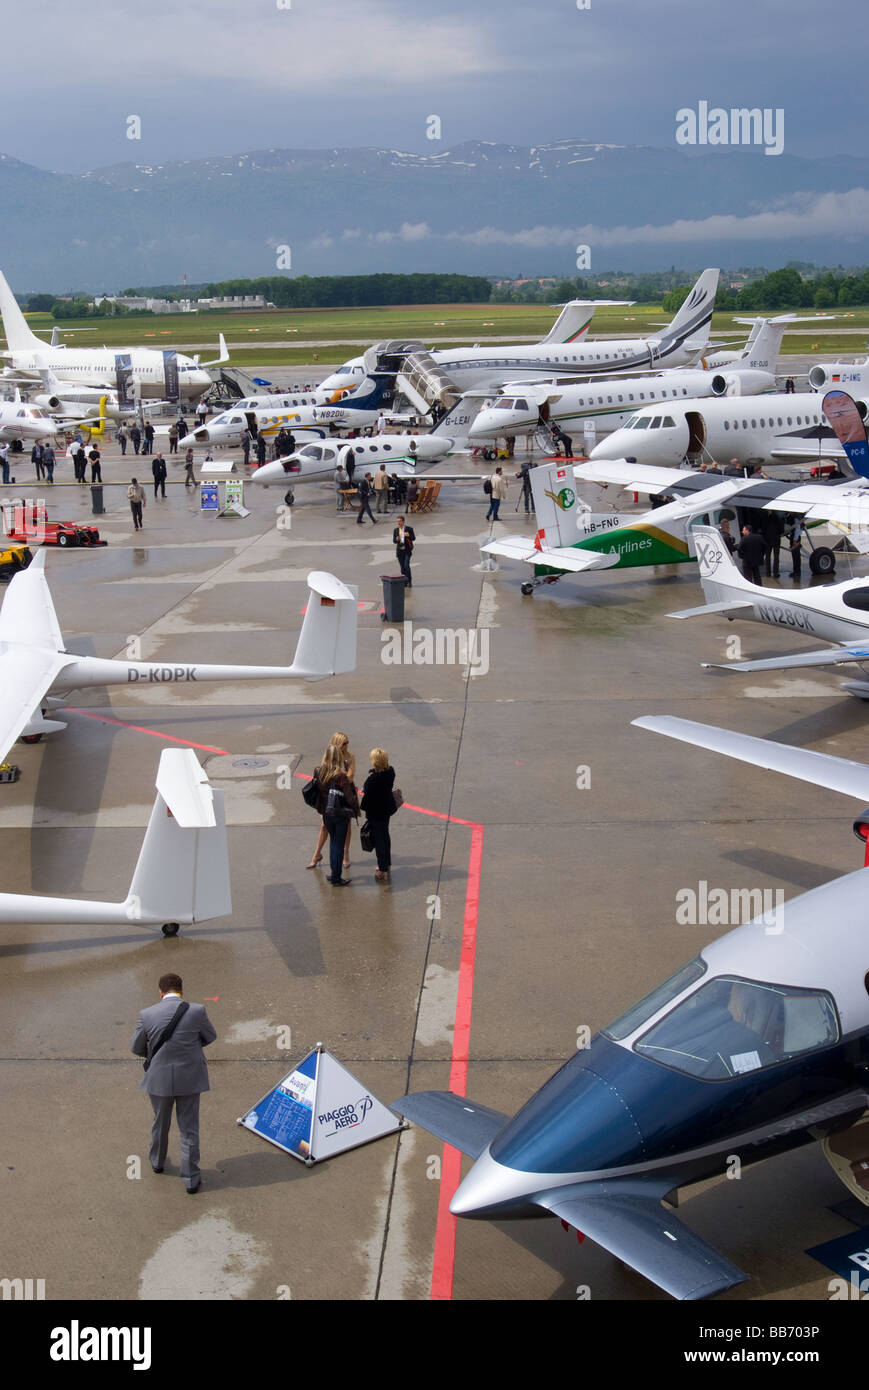 Piaggio P180 Avanti Business Aeroplane and Other Aircraft at Ebace Trade Show Geneva Airport Switzerland Geneve Suisse Stock Photo